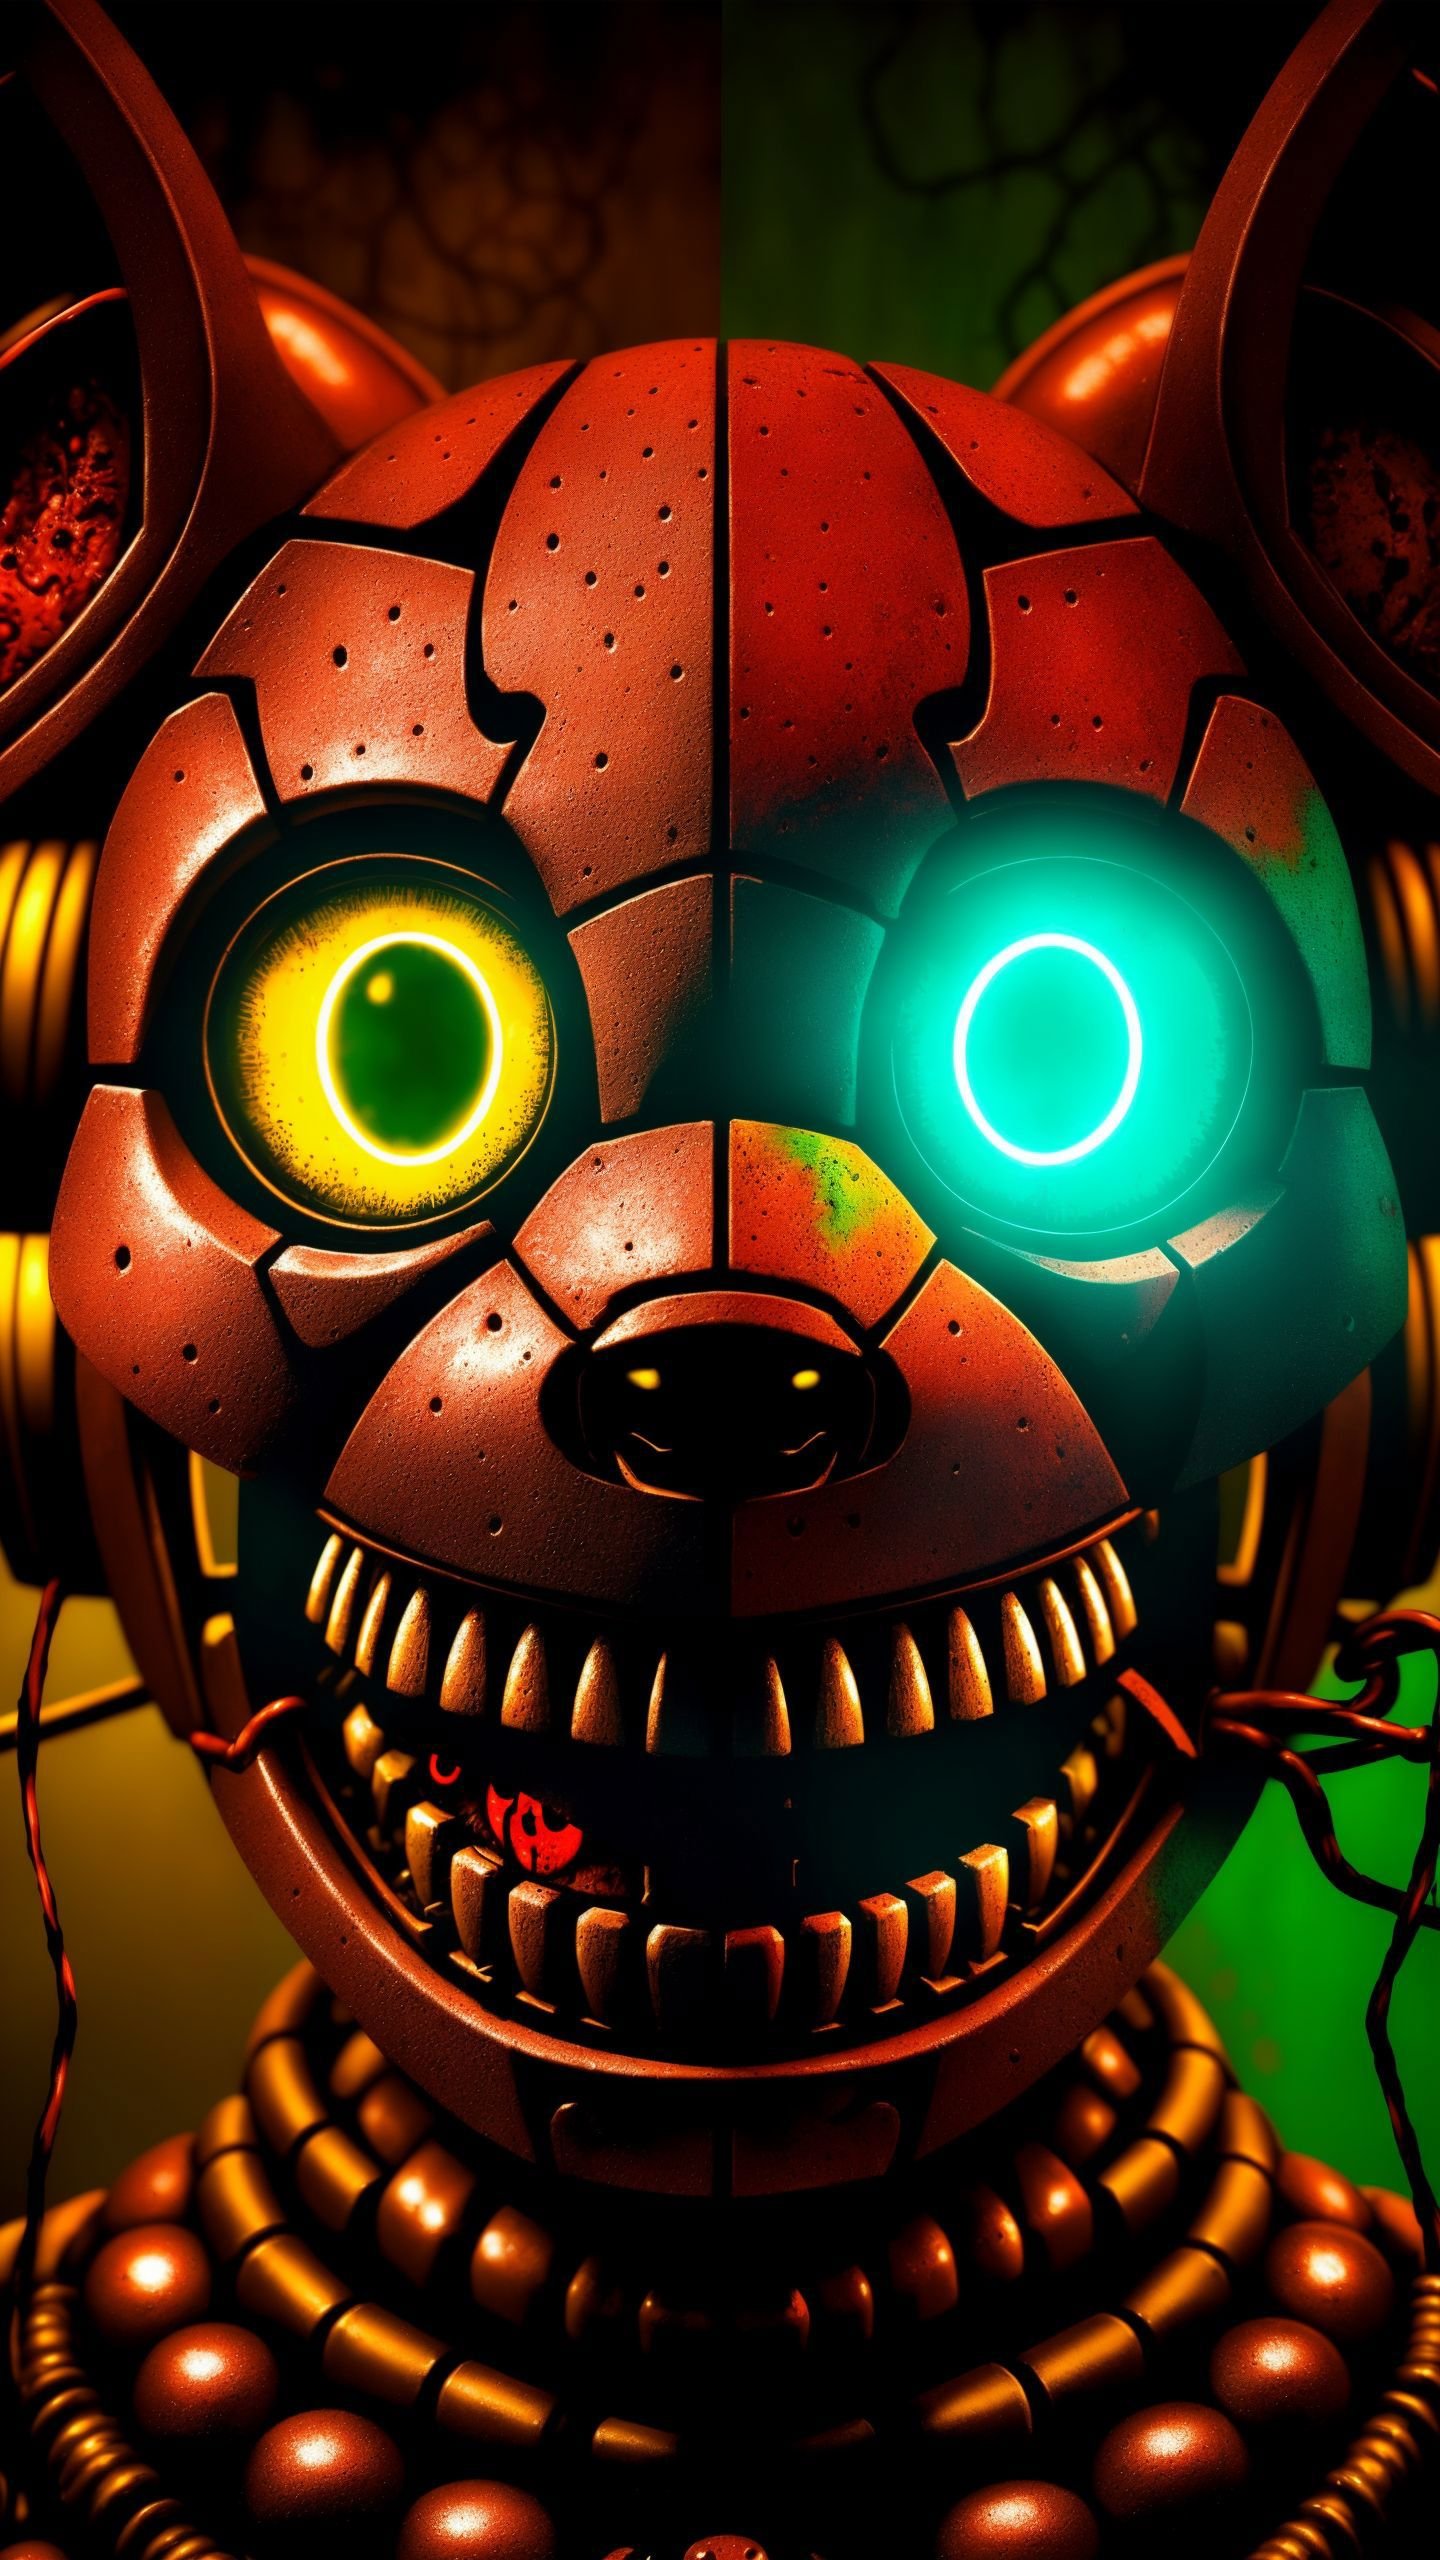 Springtrap, Nightmare Springtrap, realistic springtrap, fnaf springtrap, creepy springtrap, realistic springtrap, rainbow bloody veins growing and intertwining out of the darkness, Springtrap potrait, oozing thick blue blood, sharp neon, veins growing and pumping blood, vascular networks growing, springtrap costume, green veins everywhere, (Muted colors:1.1), (Cross-hatching:1.1), (Infrared:1.2), rust, Hypercube, ultra detailed, intricate, oil on canvas, ((dry brush, ultra sharp)), (surrealism:1.1), (disturbing:1.1), sparks, lensflare, rim lighting, backlighting, dark atmosphere, RTX, post processing, fnaf pizzeria